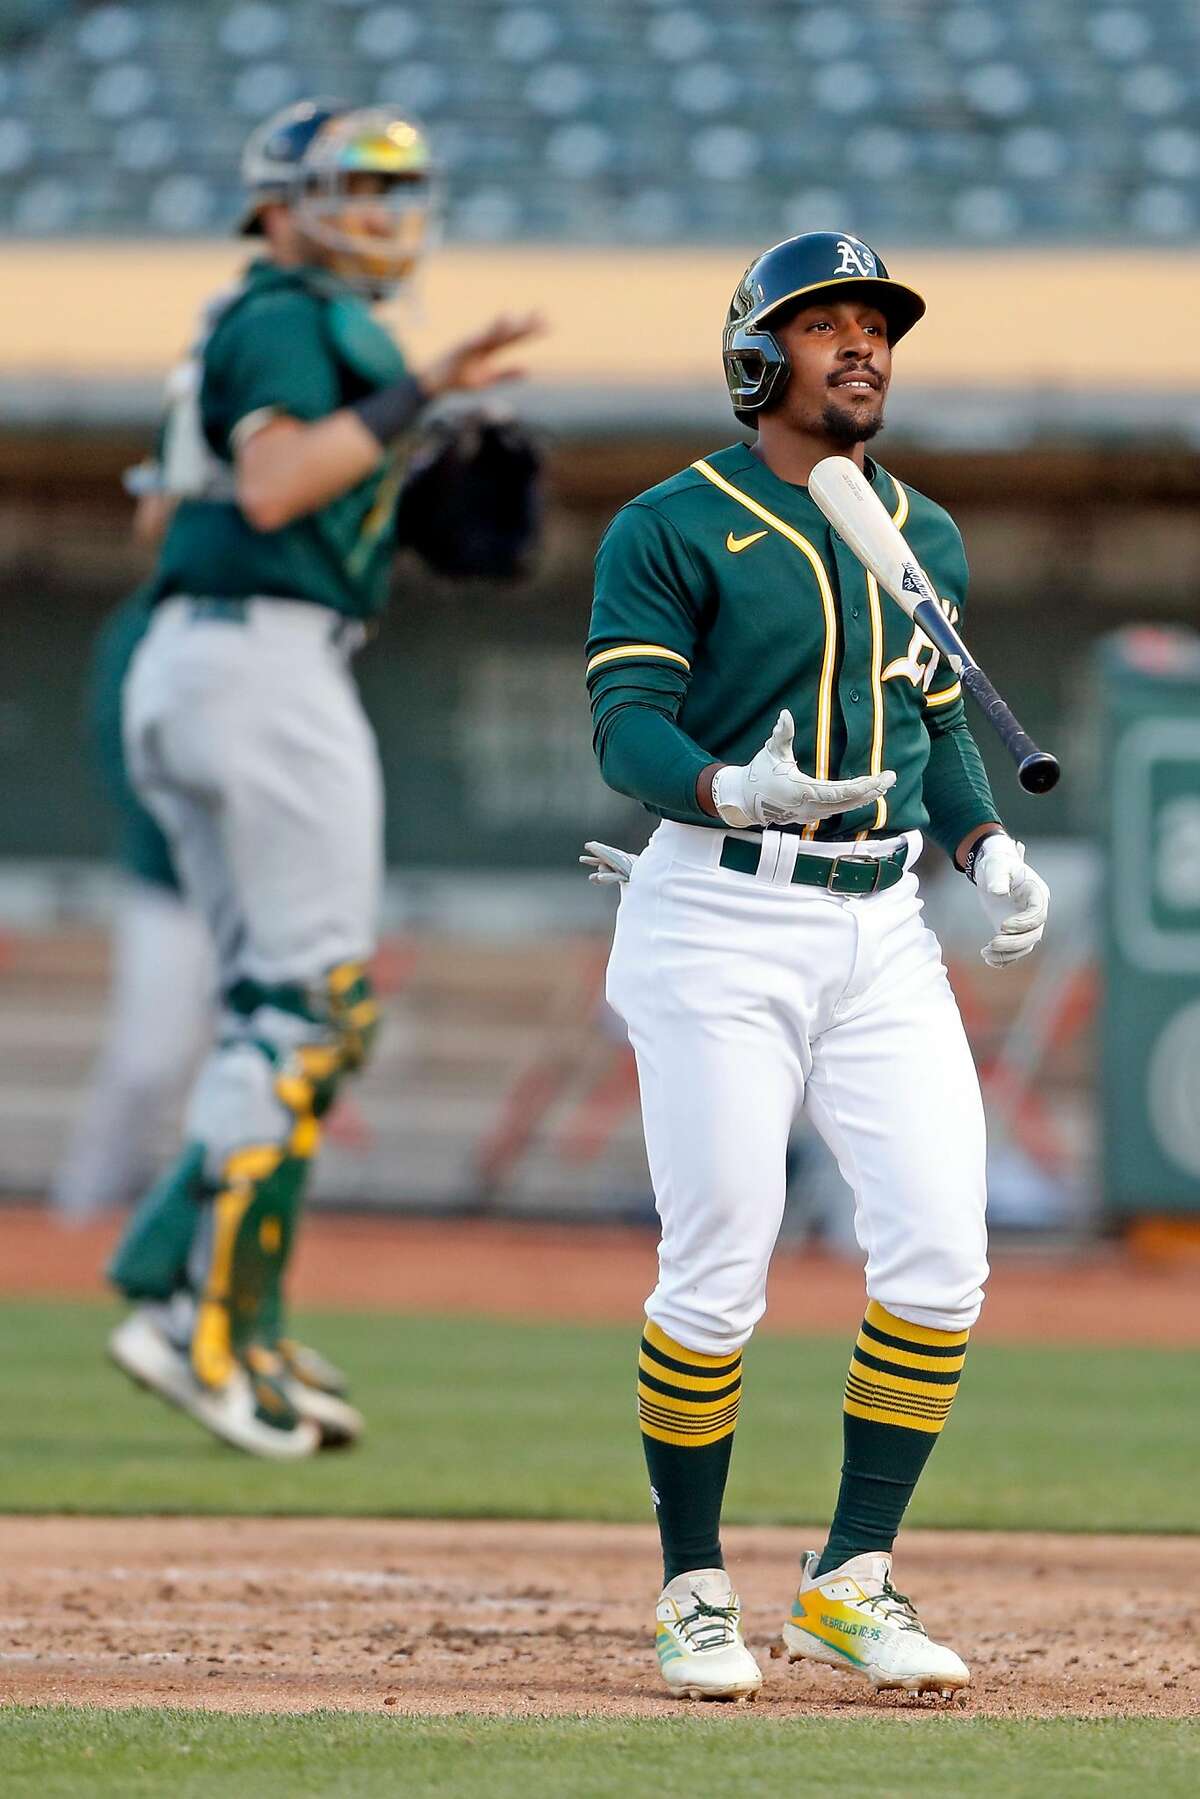 Oakland Athletics' Tony Kemp reacts to striking out during intrasquad simulated game at Oakland Coliseum in Oakland, Calif., on Monday, July 13, 2020.